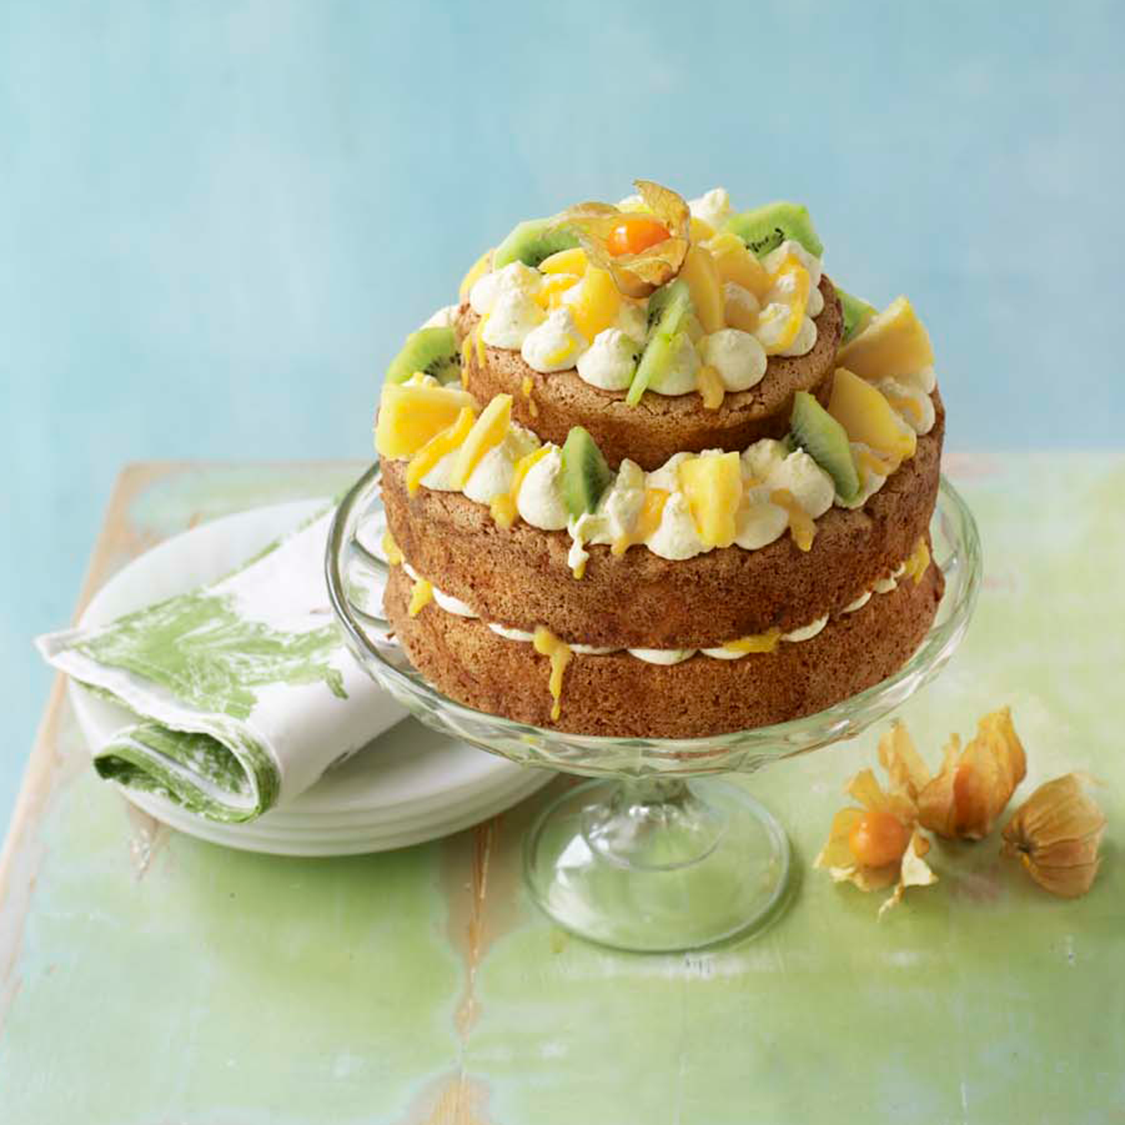 Coffee Morning Recipes | Coffee Morning | Macmillan Cancer Support